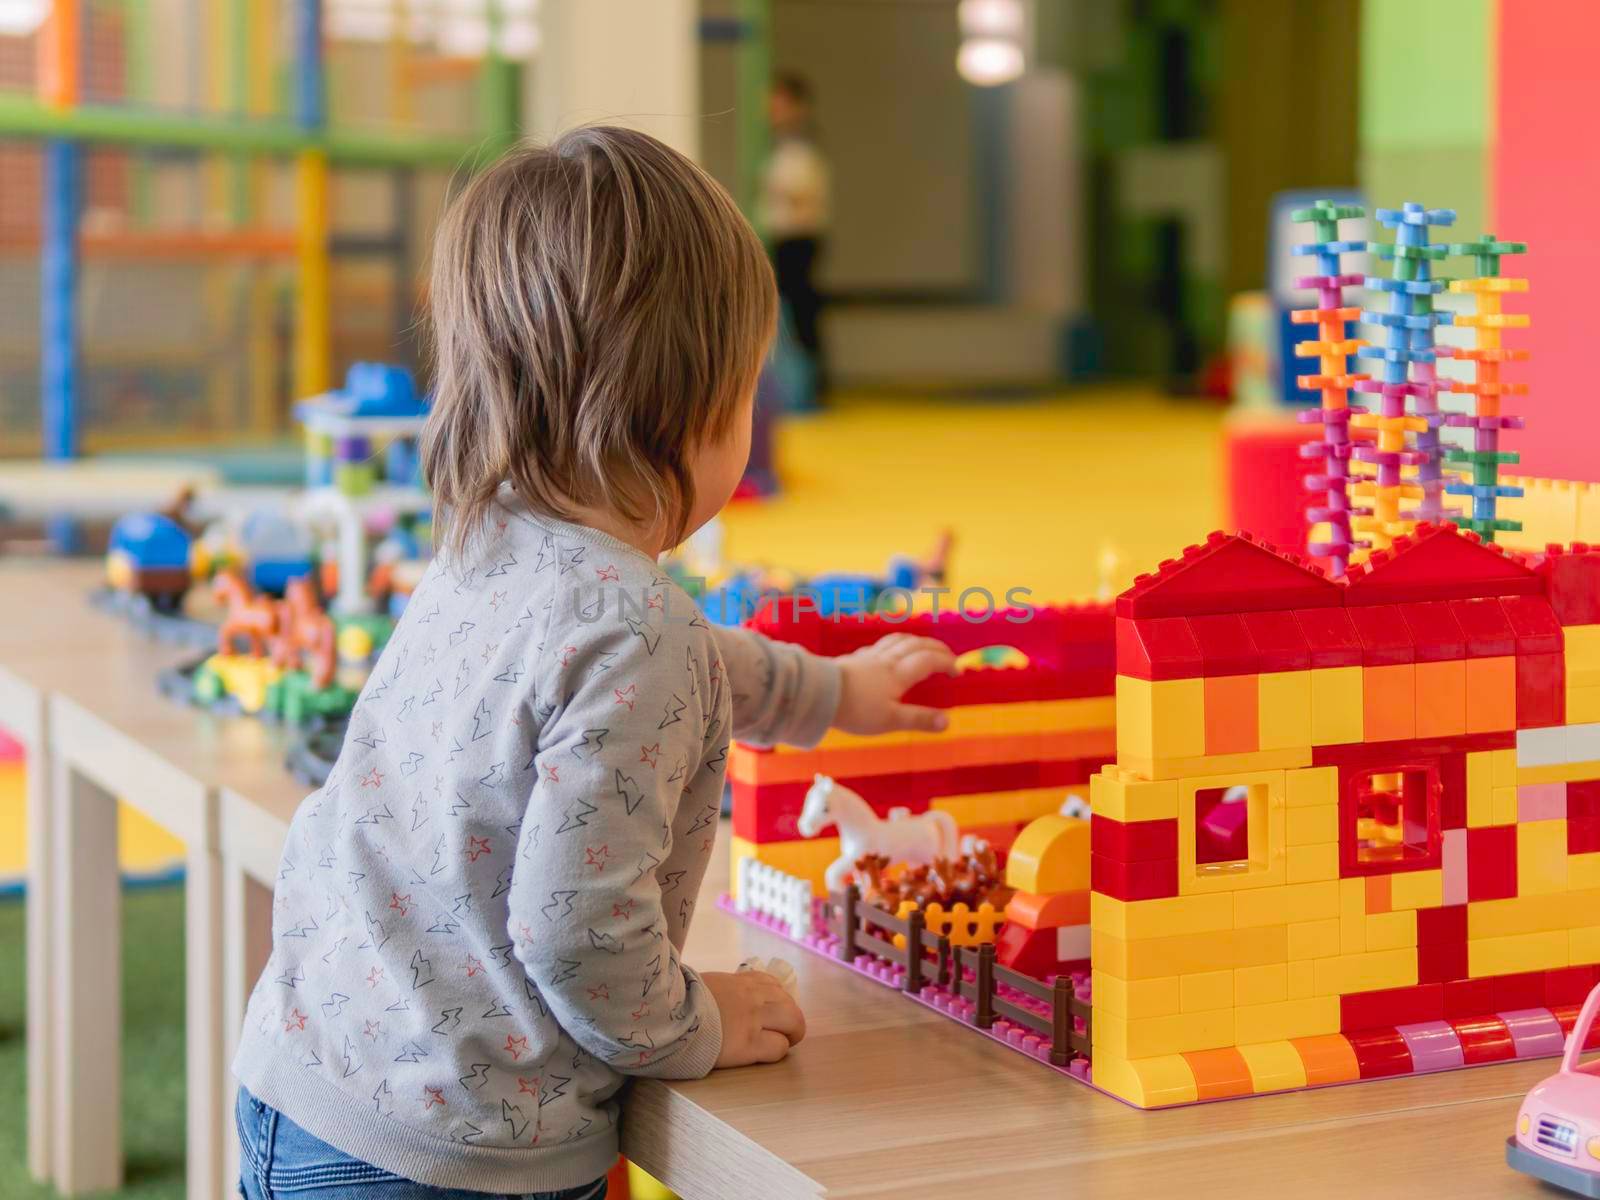 Toddler plays with colorful toy blocks. Little boy stares on figure from toy constructor. Interior of kindergarten or nursery. Indoors leisure activity for children.